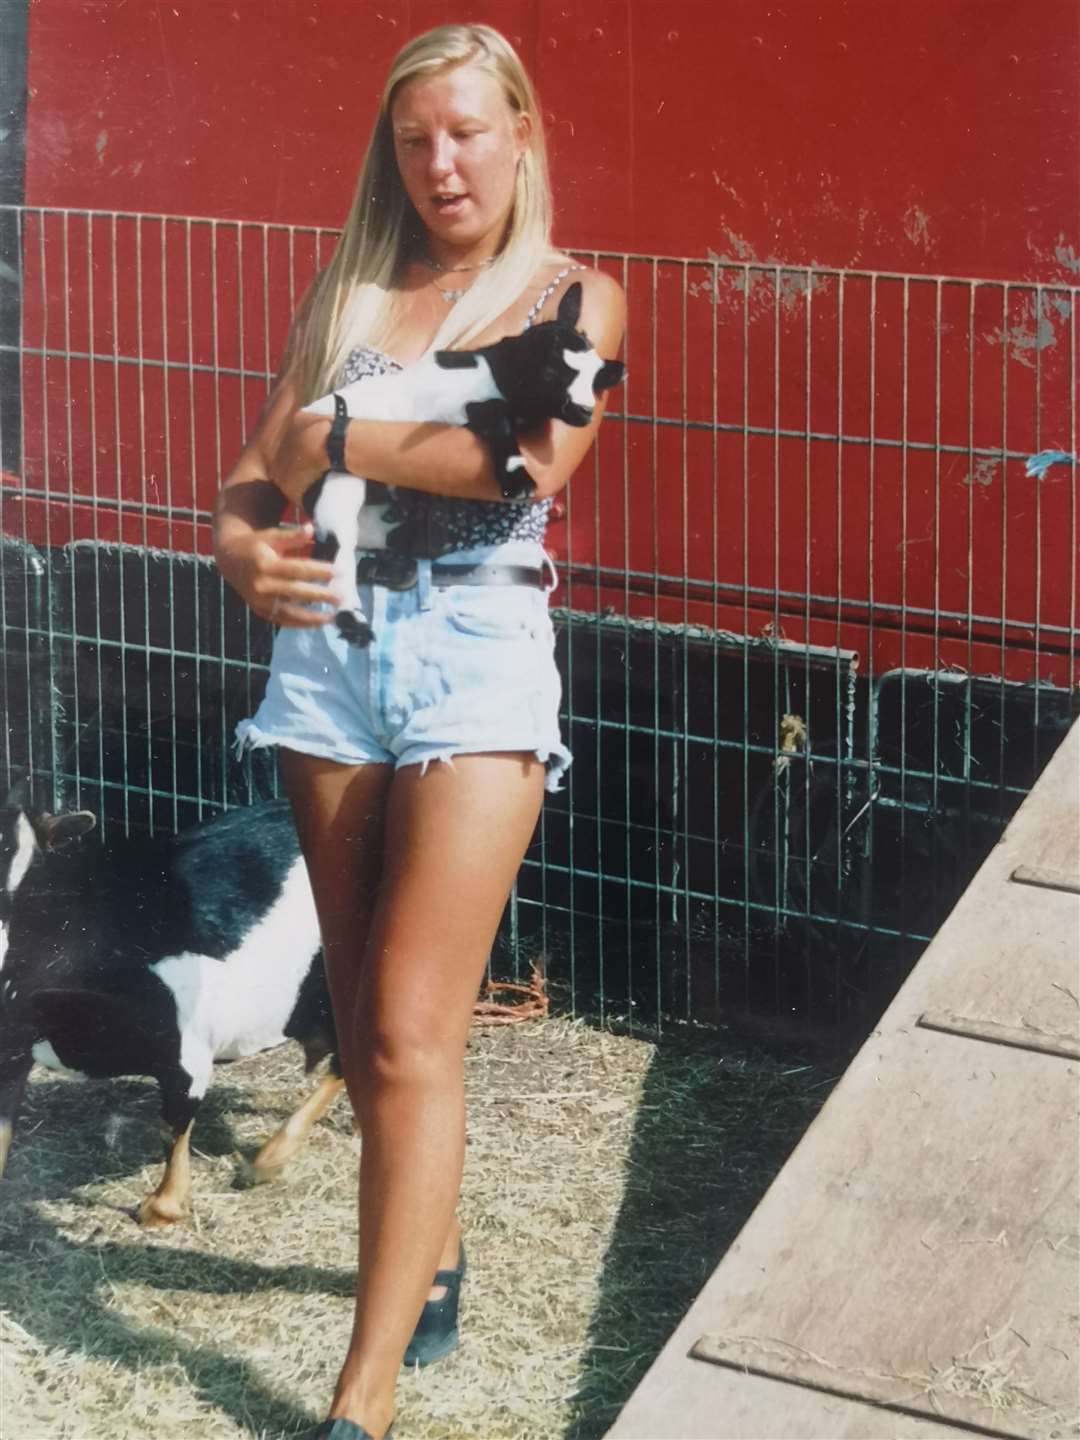 Amanda helping out with the animals during her time with the circus in France.